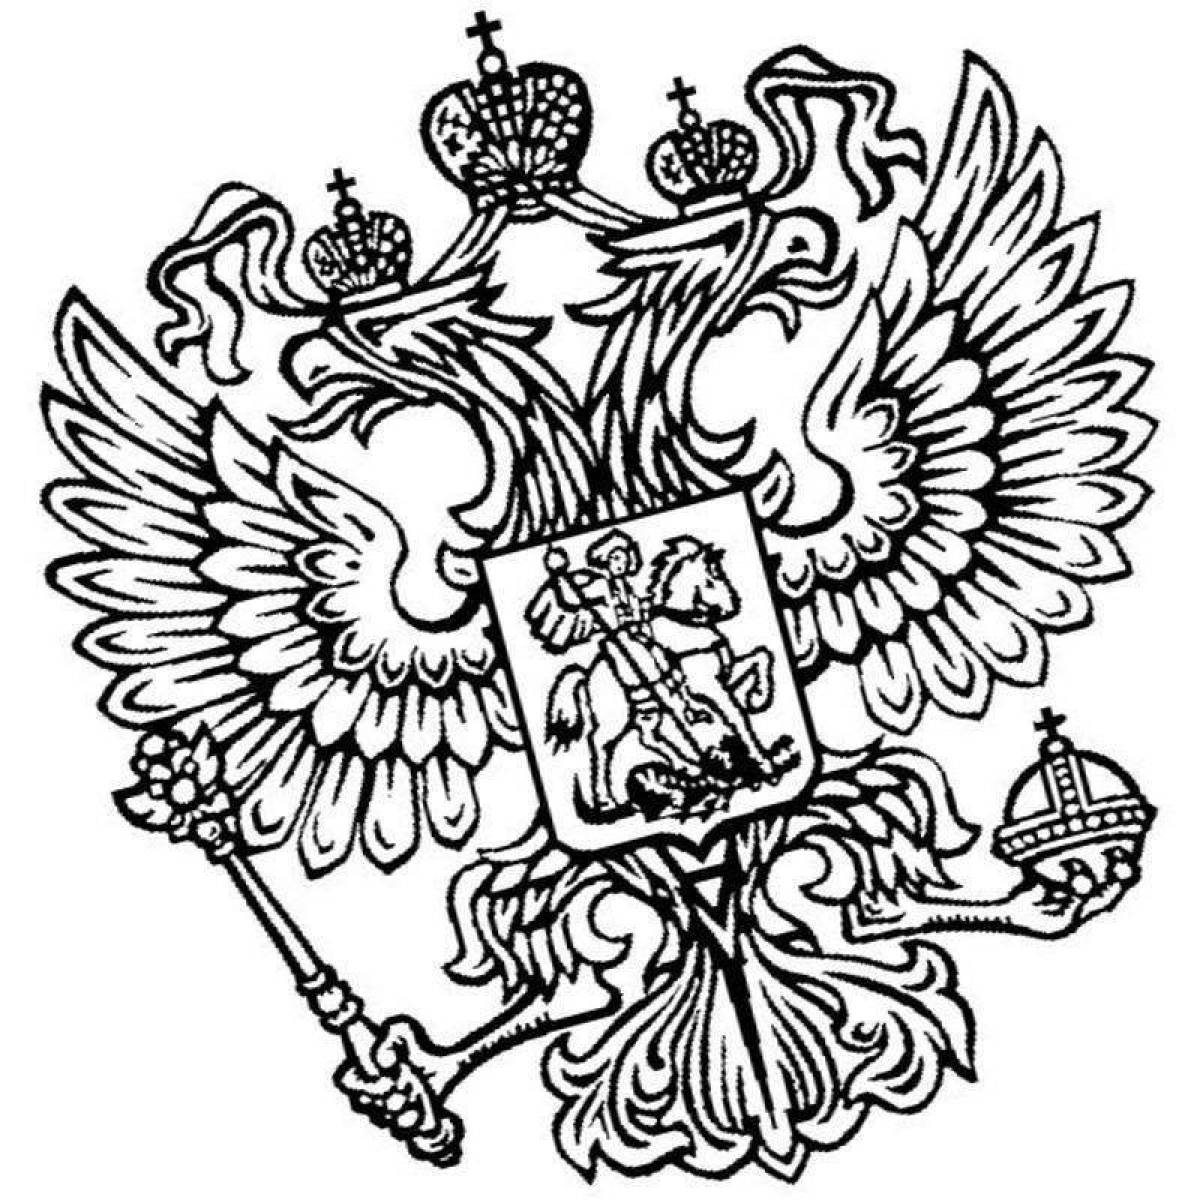 Russian coat of arms #4